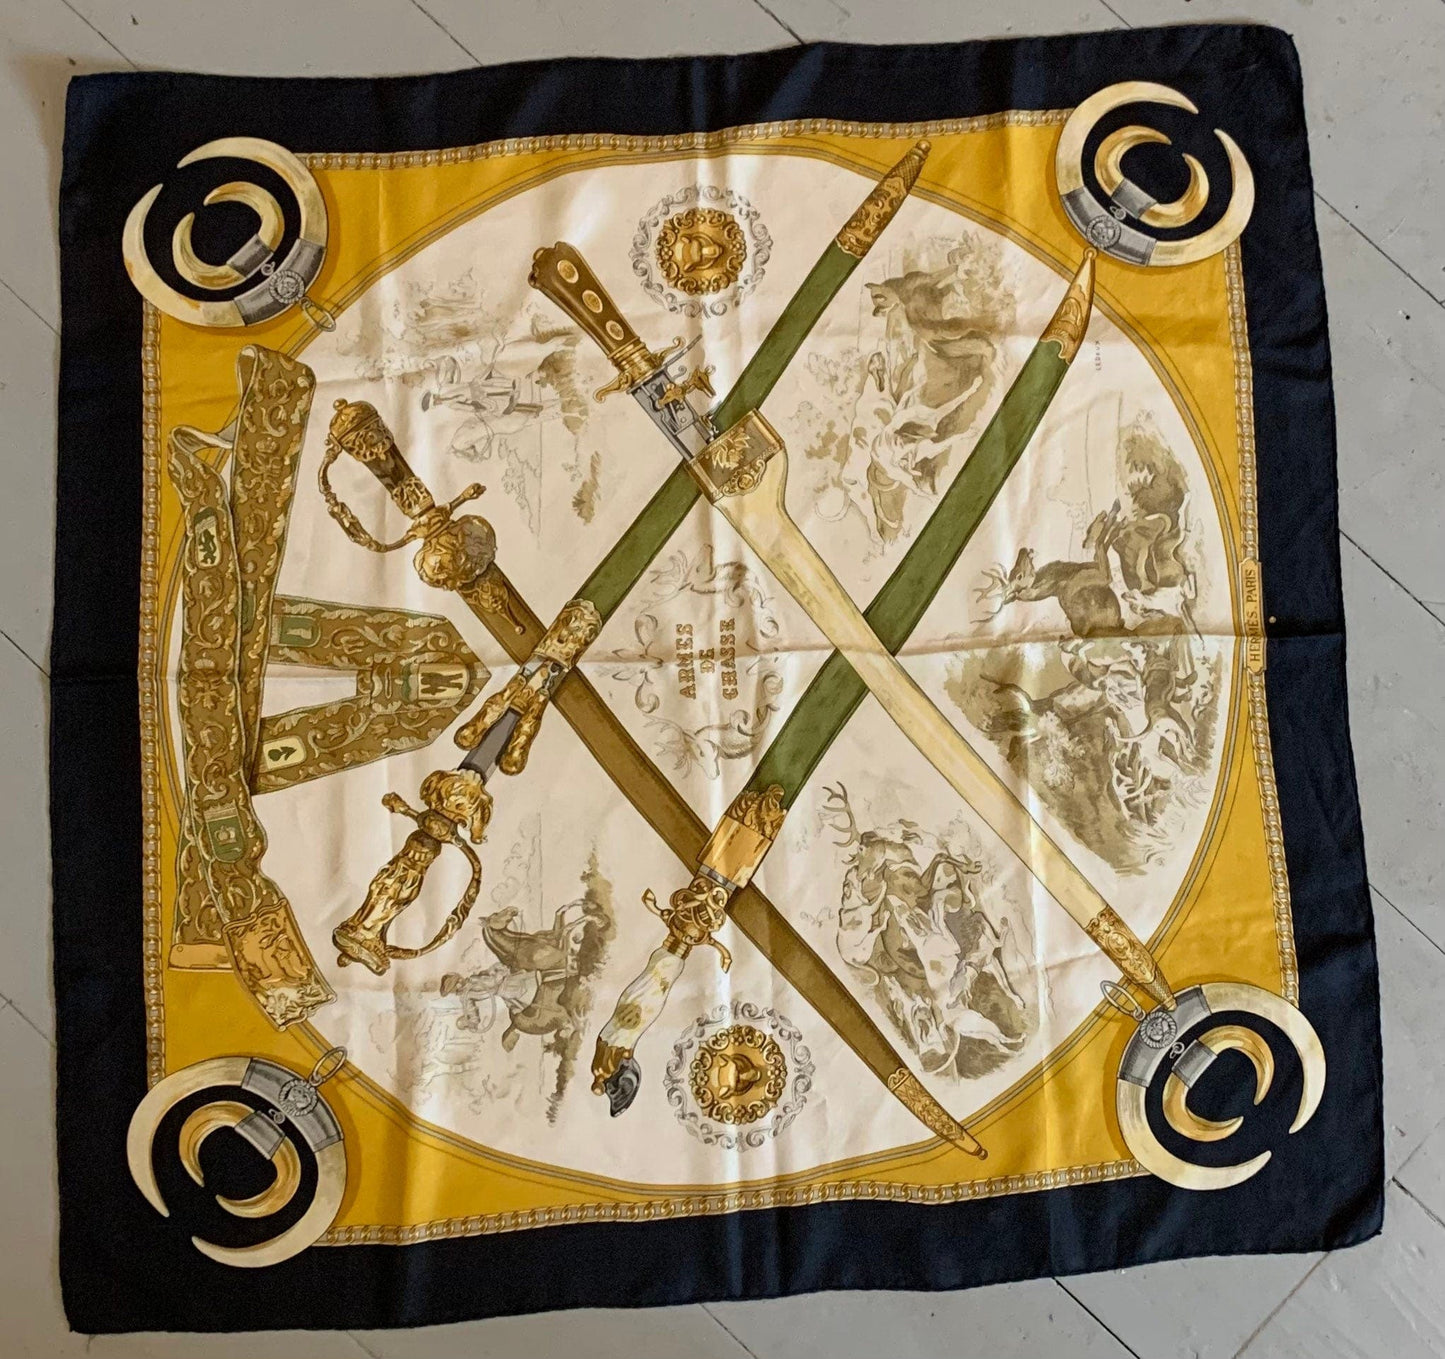 Vintage Hermes Scarf &#39;Armes de Chasse &#39; Phillip Ledoux 1970 Silk Scarf 90cm x 90cm - Navy Gold and Green Colourway